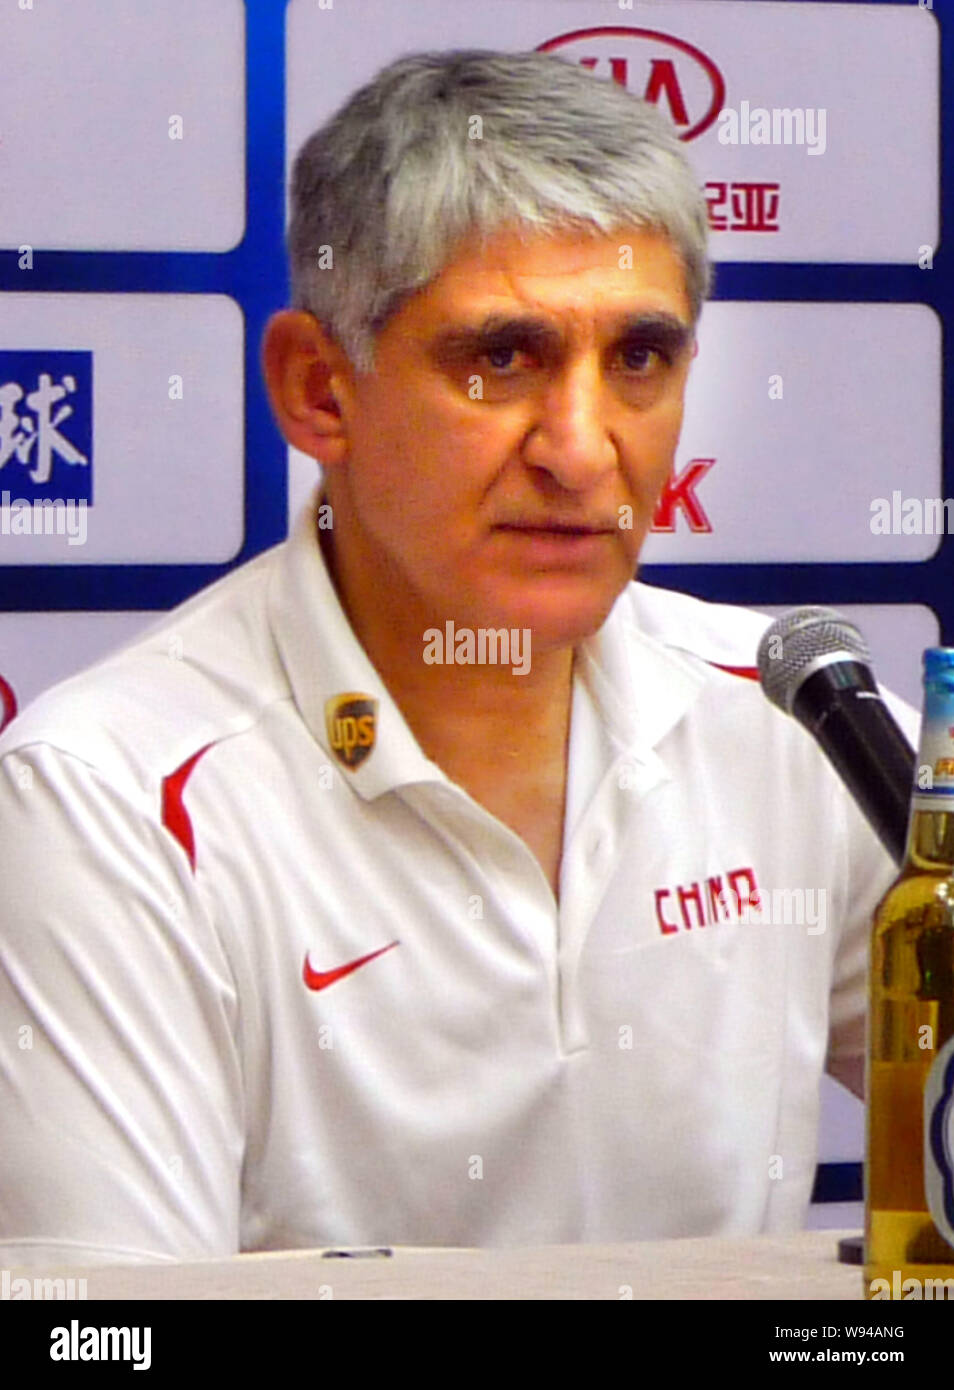 Panagiotis Giannakis,the new head coach of the China mens basketball team, attends a press conference for the Stankovic Continental Cup 2013 in Guangz Stock Photo